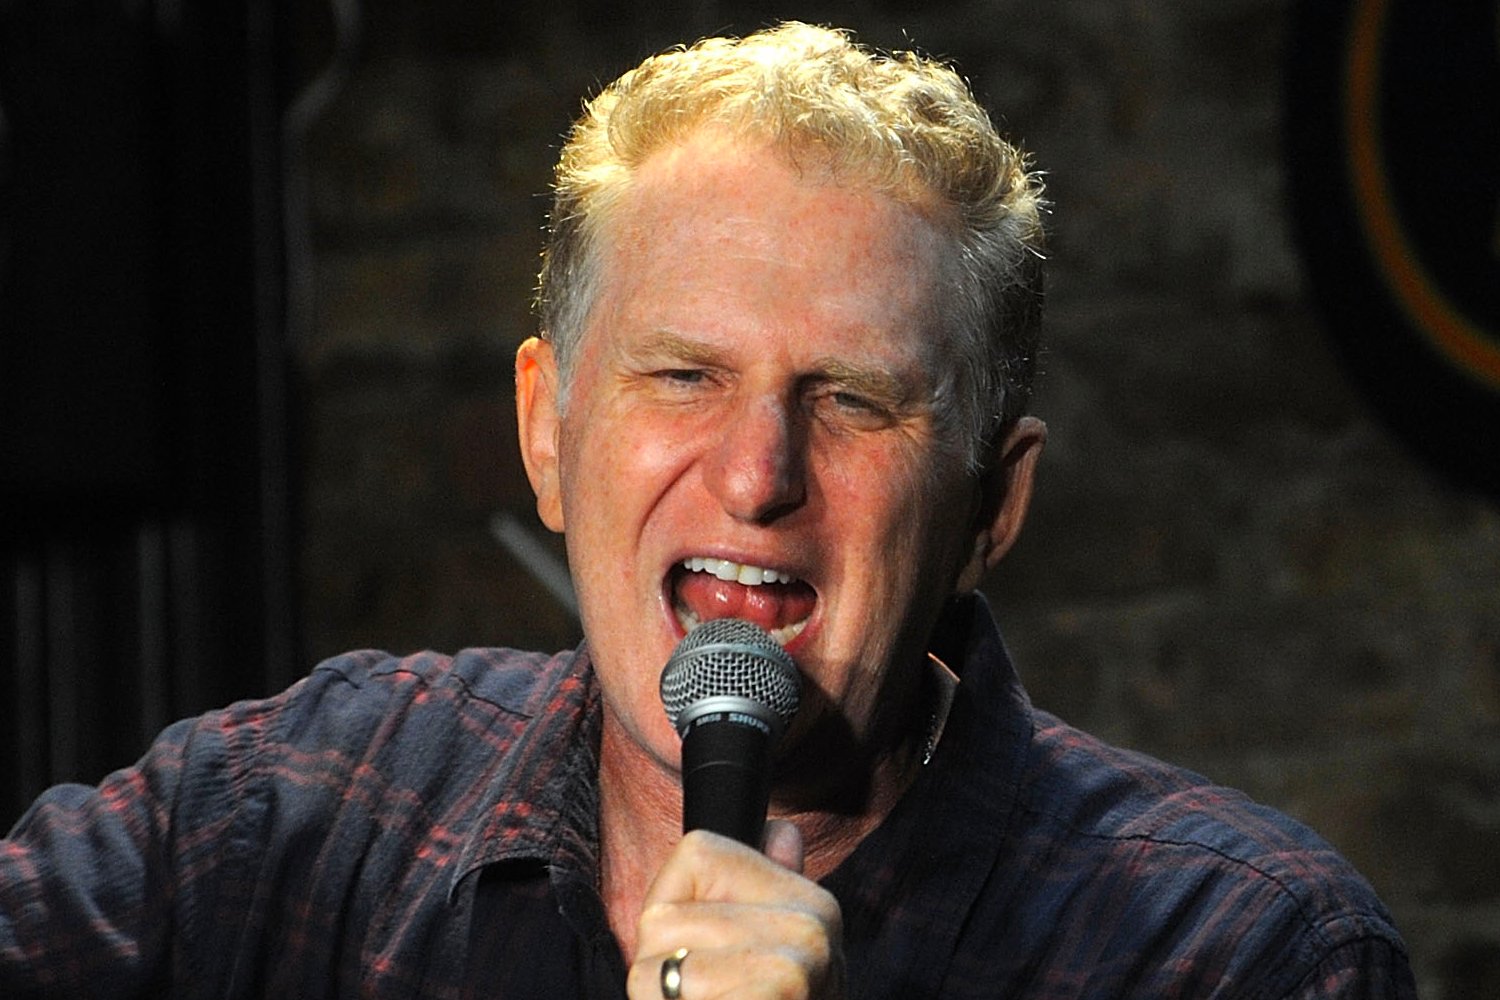 Michael Rapaport yelling into a micrphone